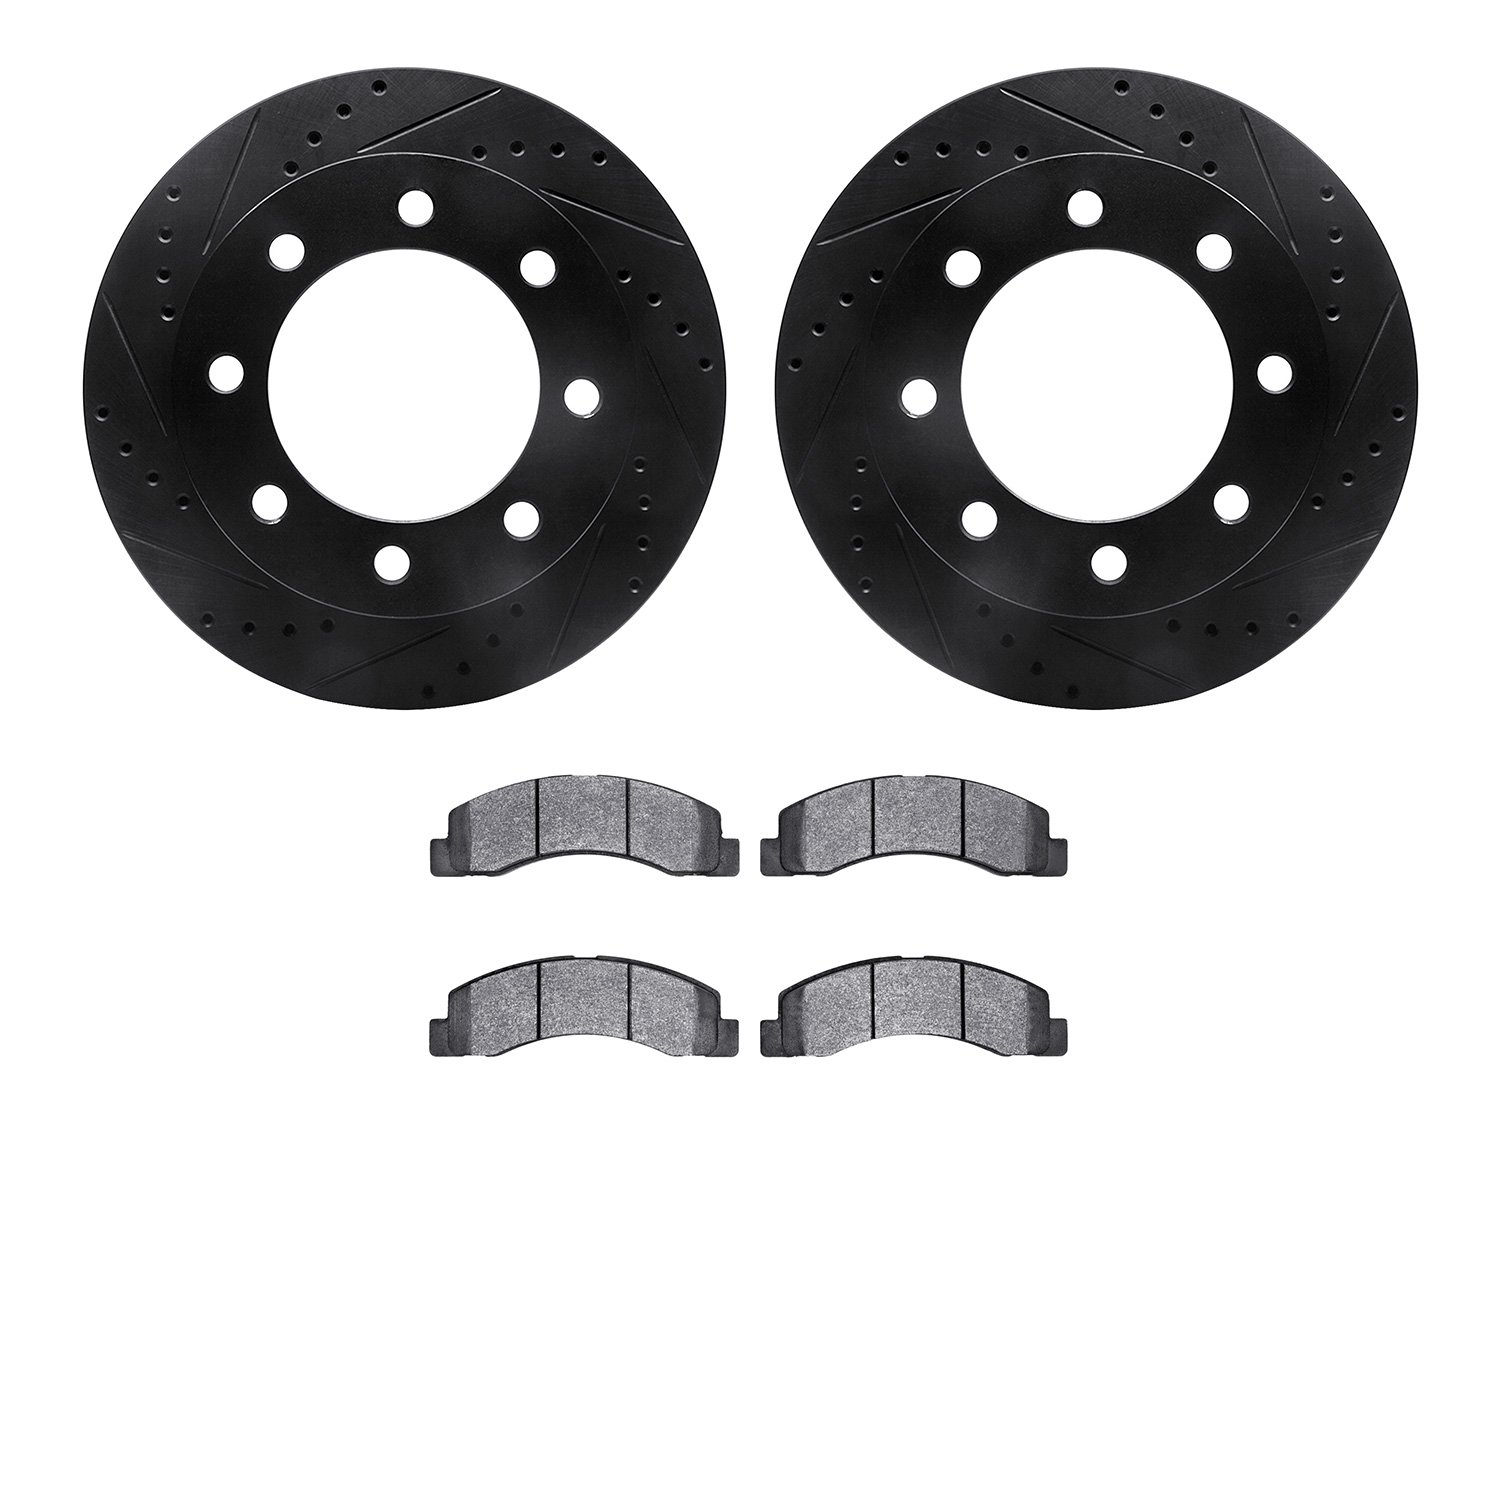 8402-54043 Drilled/Slotted Brake Rotors with Ultimate-Duty Brake Pads Kit [Black], 1999-1999 Ford/Lincoln/Mercury/Mazda, Positio